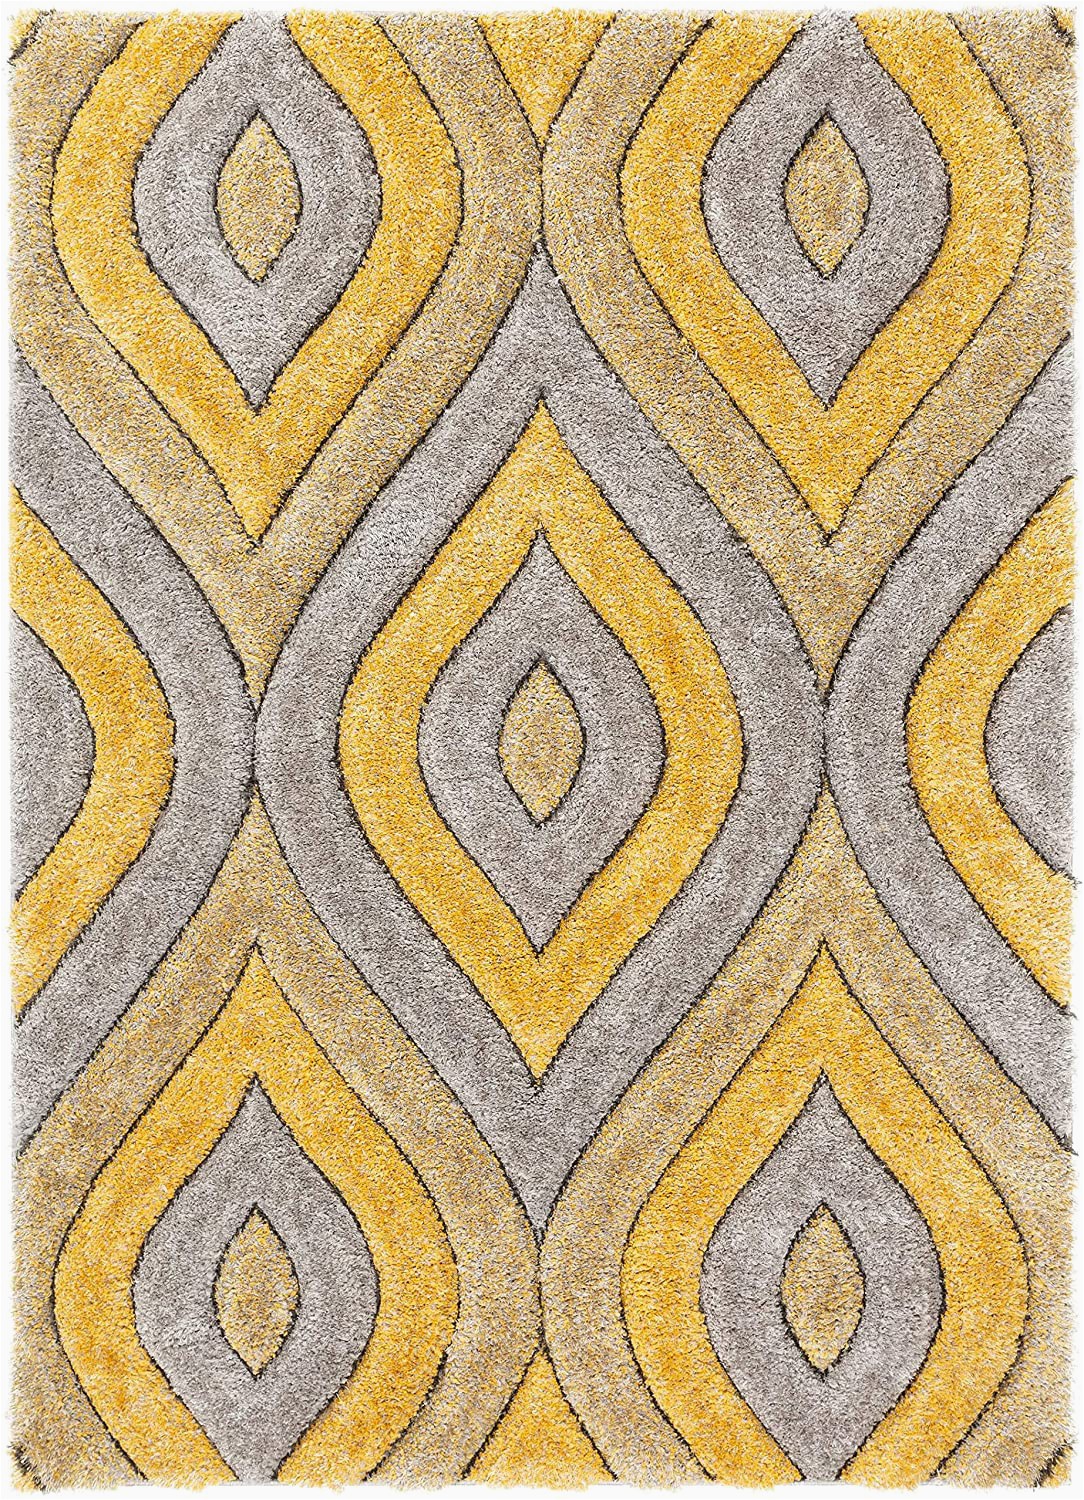 Area Rugs with Yellow Accents Well Woven Moira Yellow Geometric Trellis Thick soft Plush 3d Textured Shag area Rug 5×7 5 3" X 7 3"